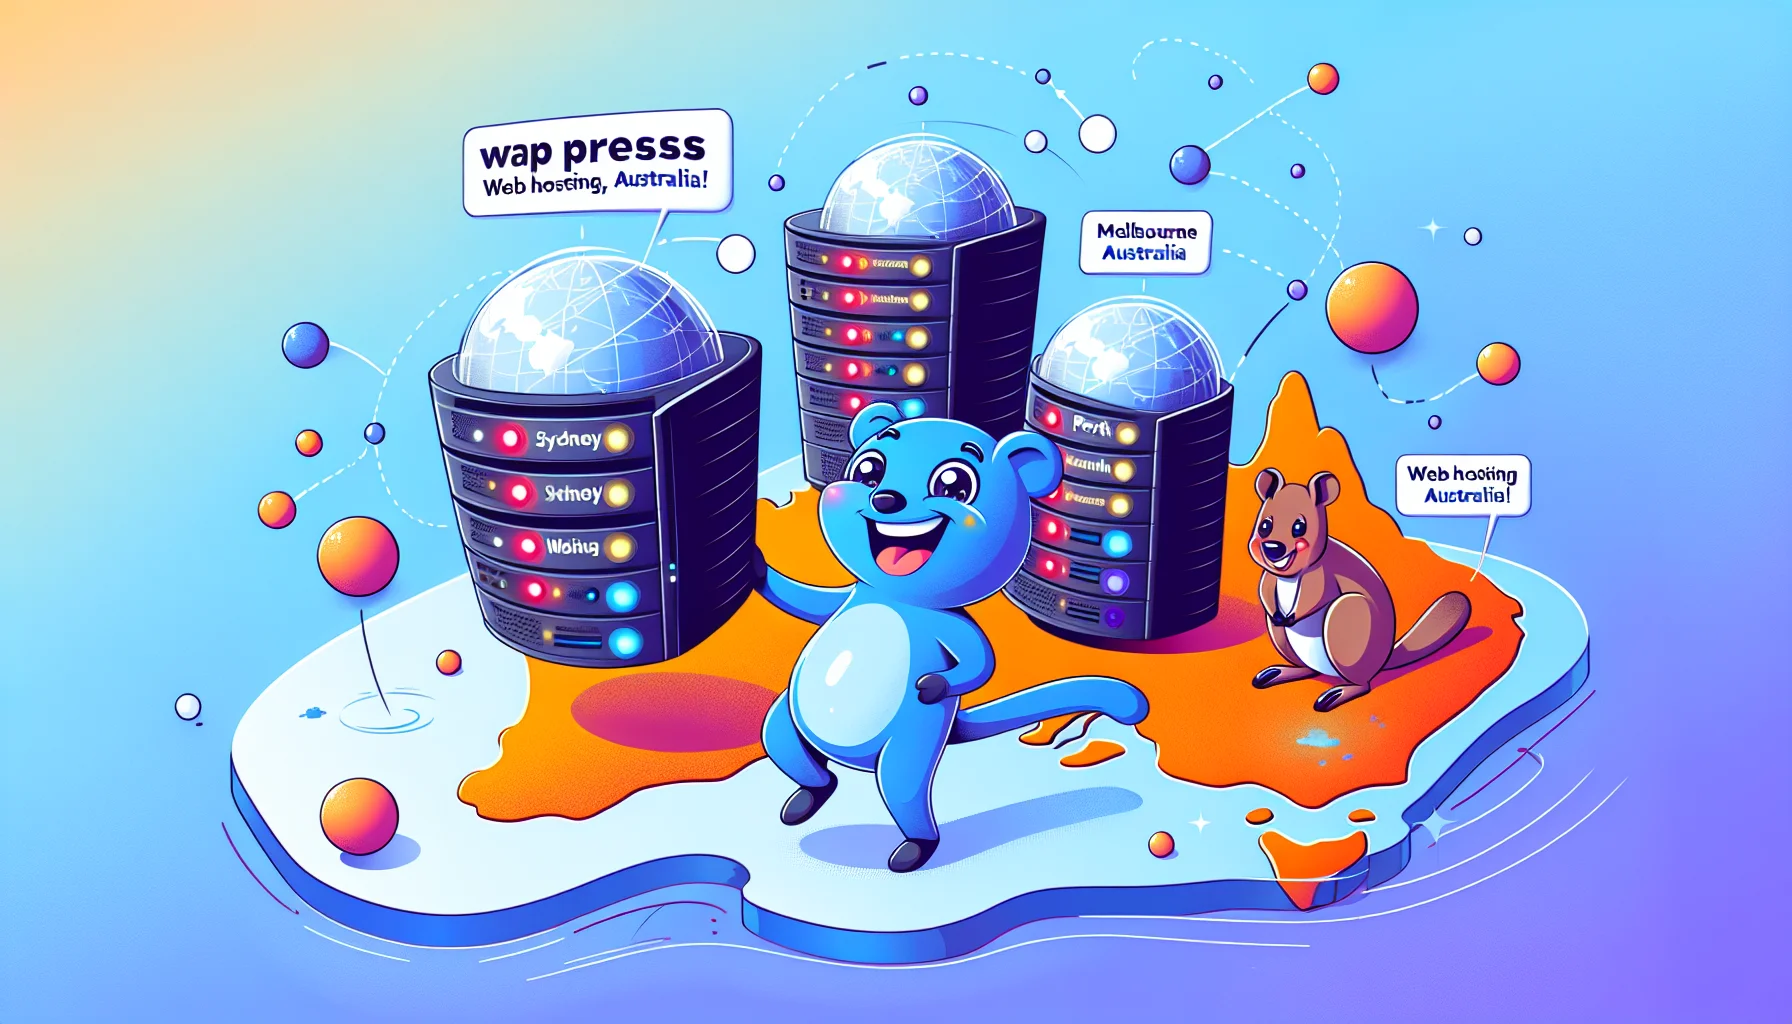 Create an image showcasing a humorous scene related to hosting a website using an abstract character named 'WPress'. This character is playfully juggling three servers named 'Sydney', 'Melbourne', and 'Perth', against a colorful illustration of the Australian map. Each server is represented by a shiny sphere with glowing dots indicating activity. Meanwhile, a quokka, the happiest animal in the world and native to Australia, is cheering on 'WPress' with a banner reading 'Web Hosting, Australia!'.